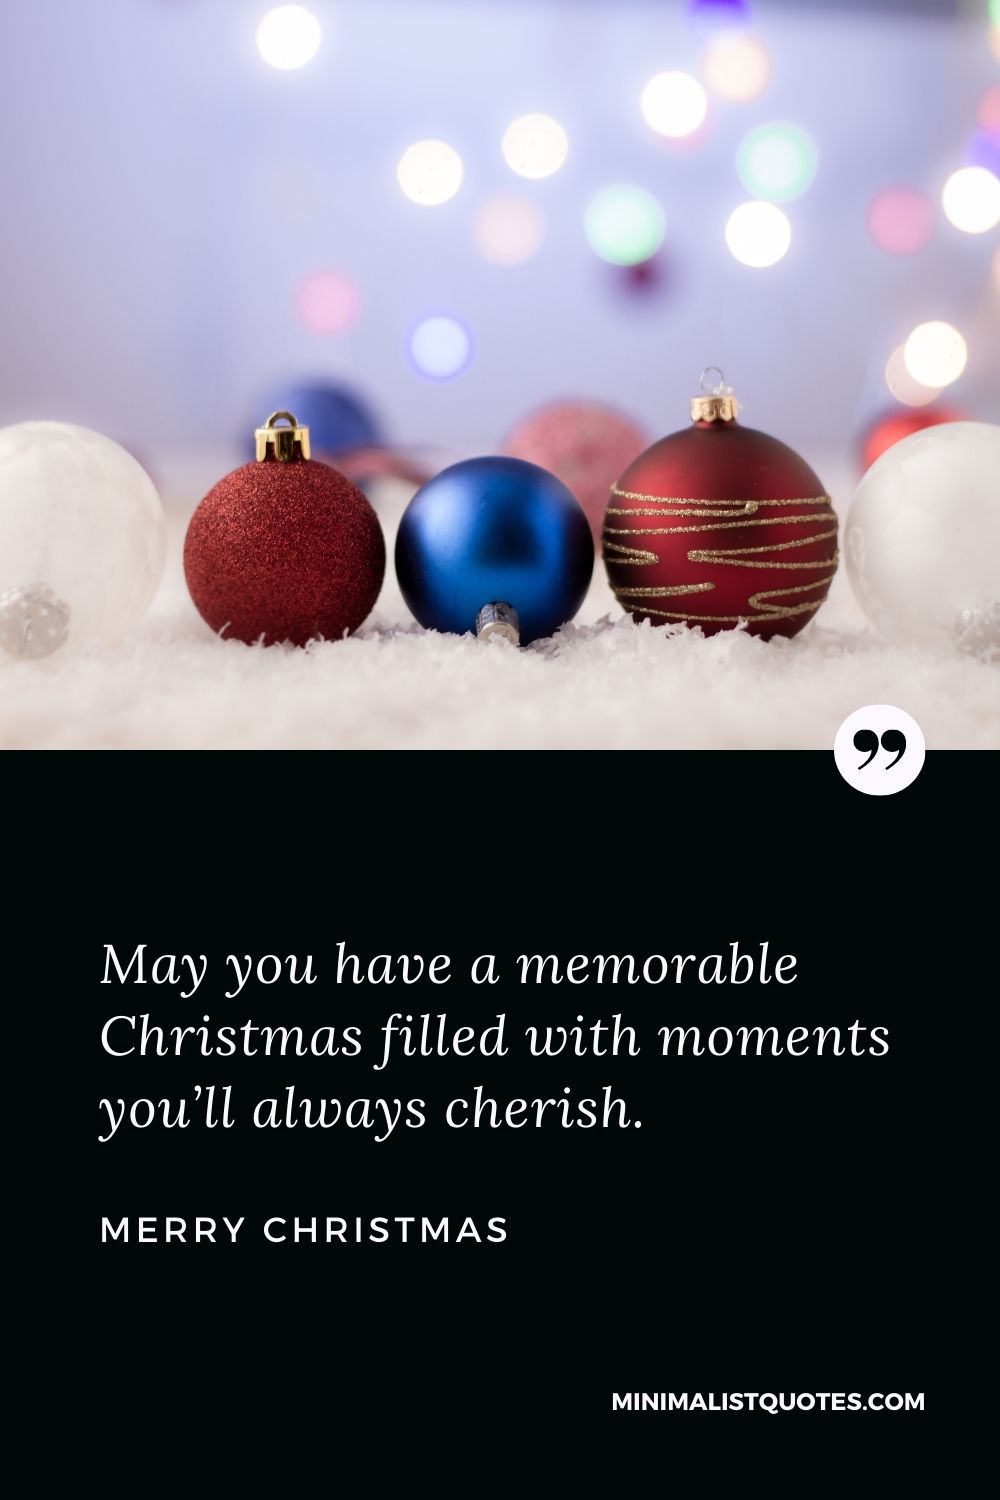 Merry Christmas Wish - May you have a memorable Christmas filled with moments you’ll always cherish.